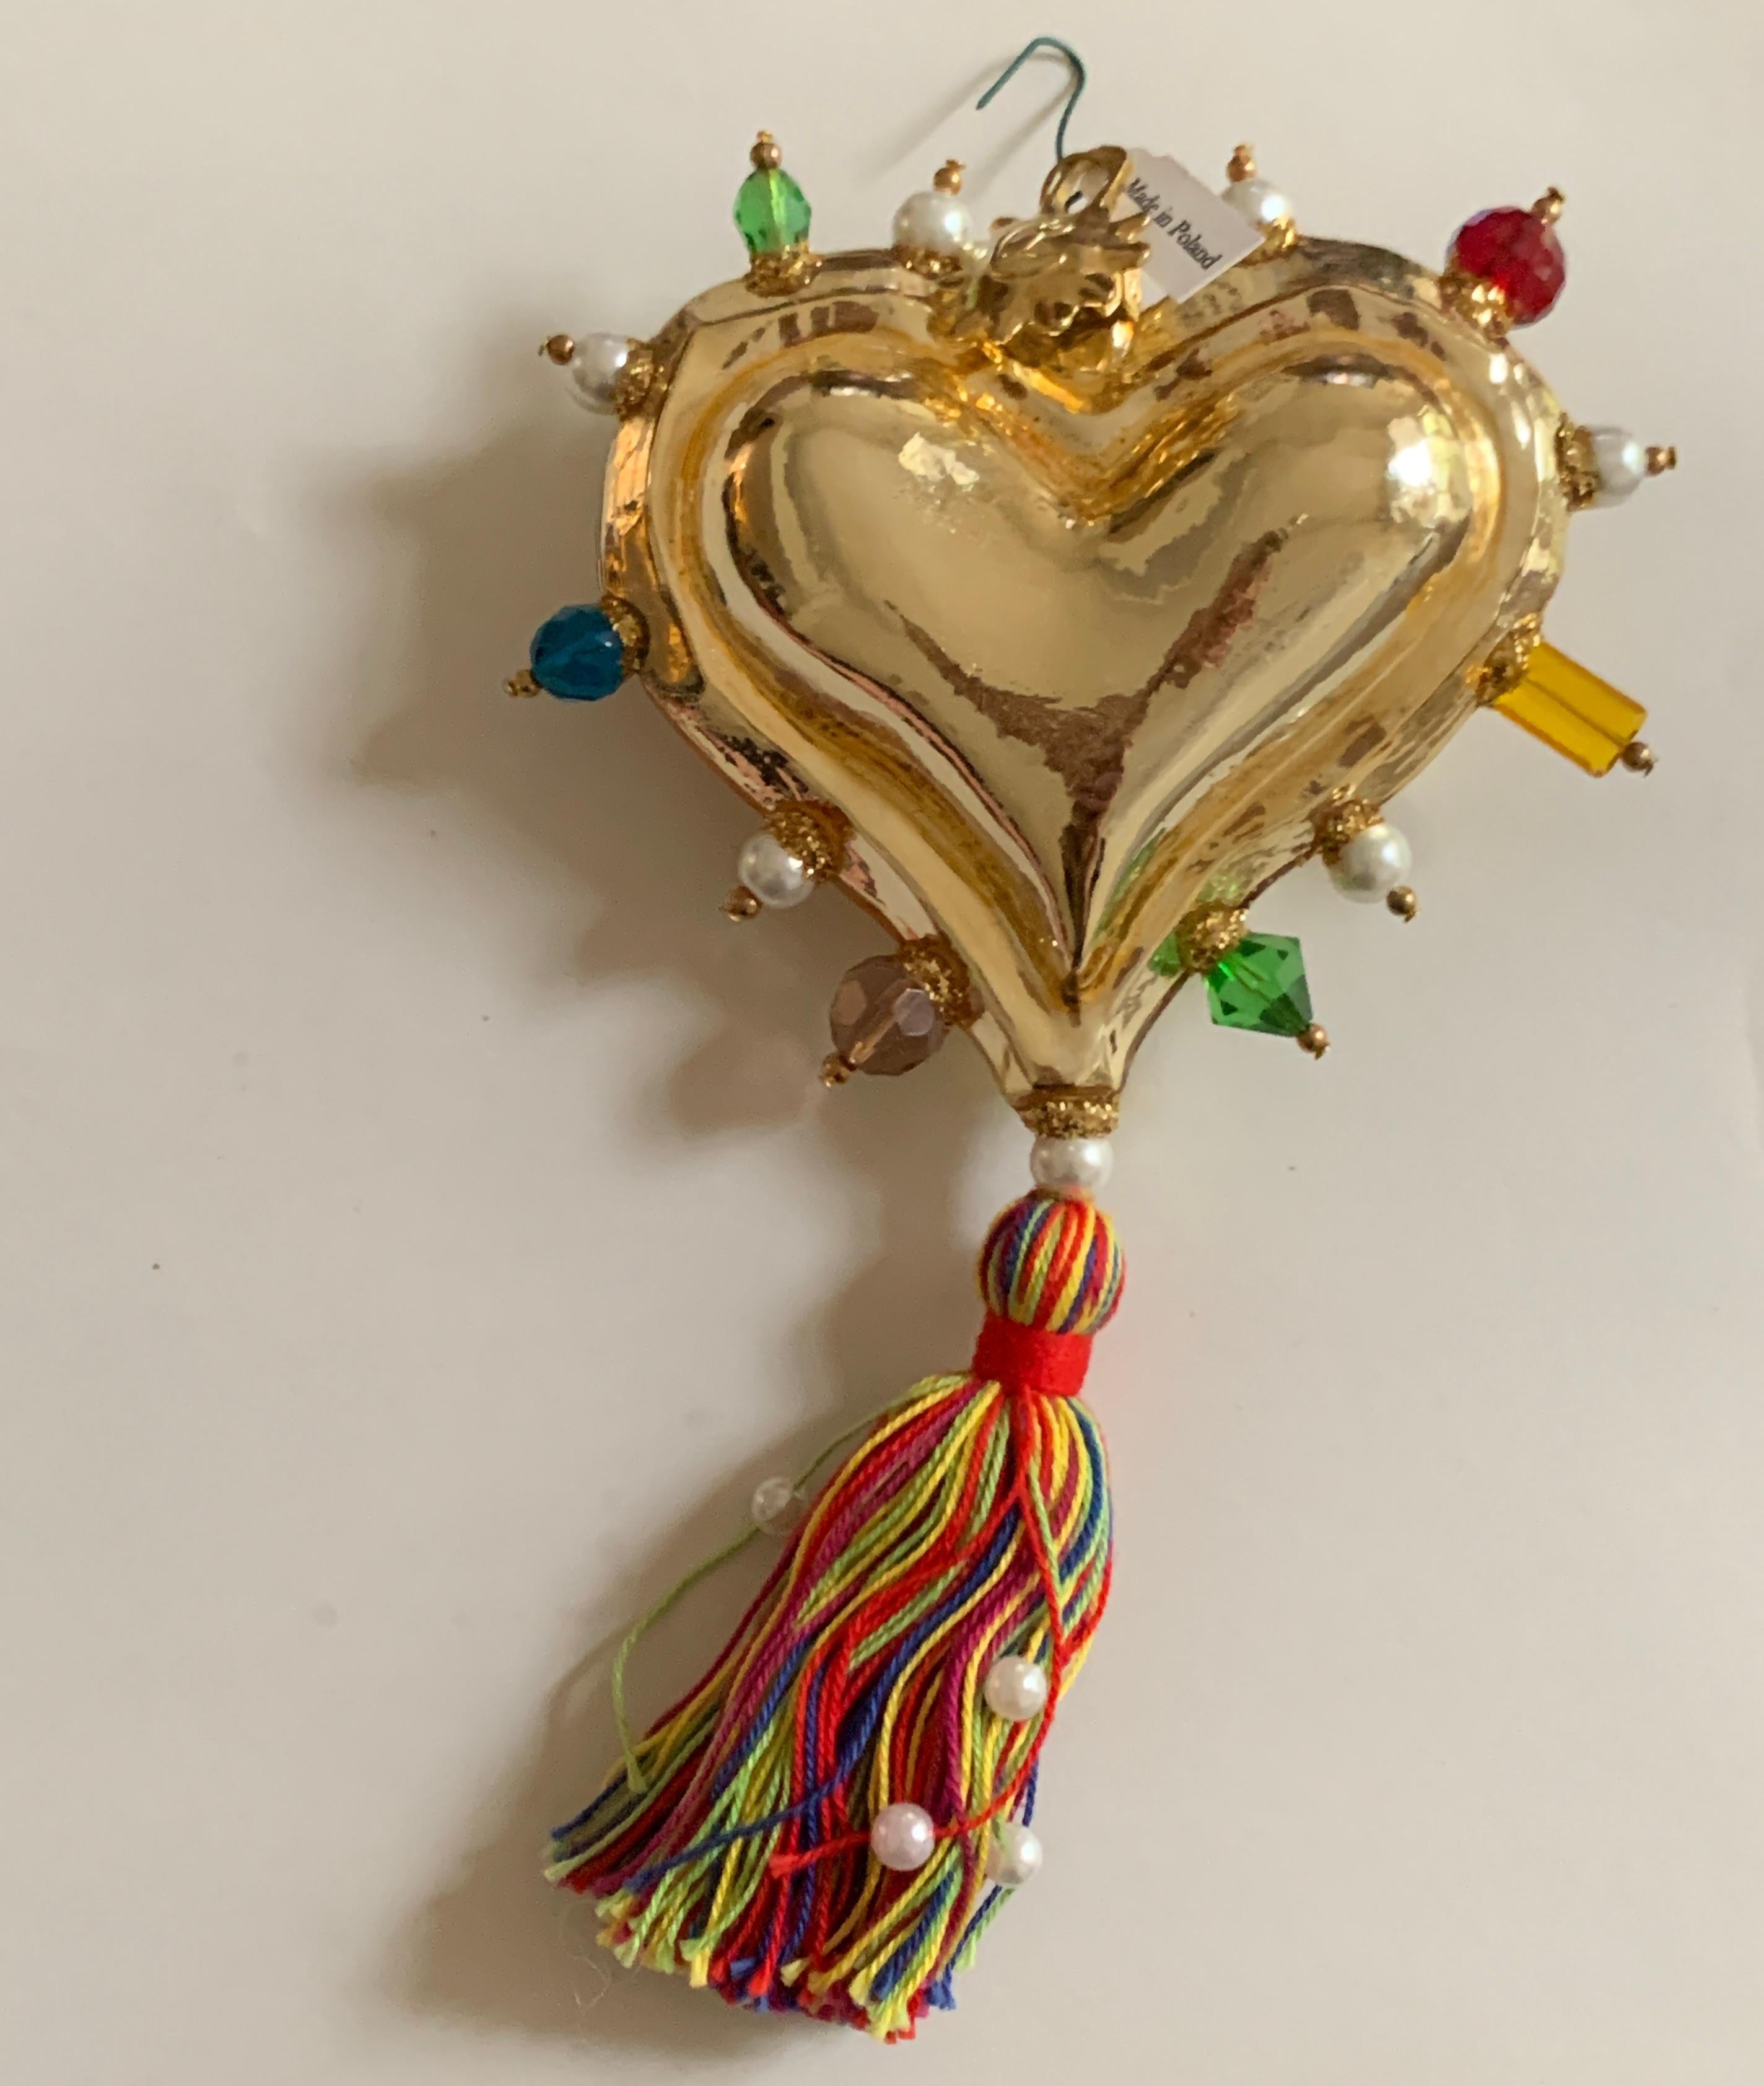 Christian Lacroix gold mouth blown and hand painted glass heart ornament with bead accents and a multicolored tassel at bottom. Signed 